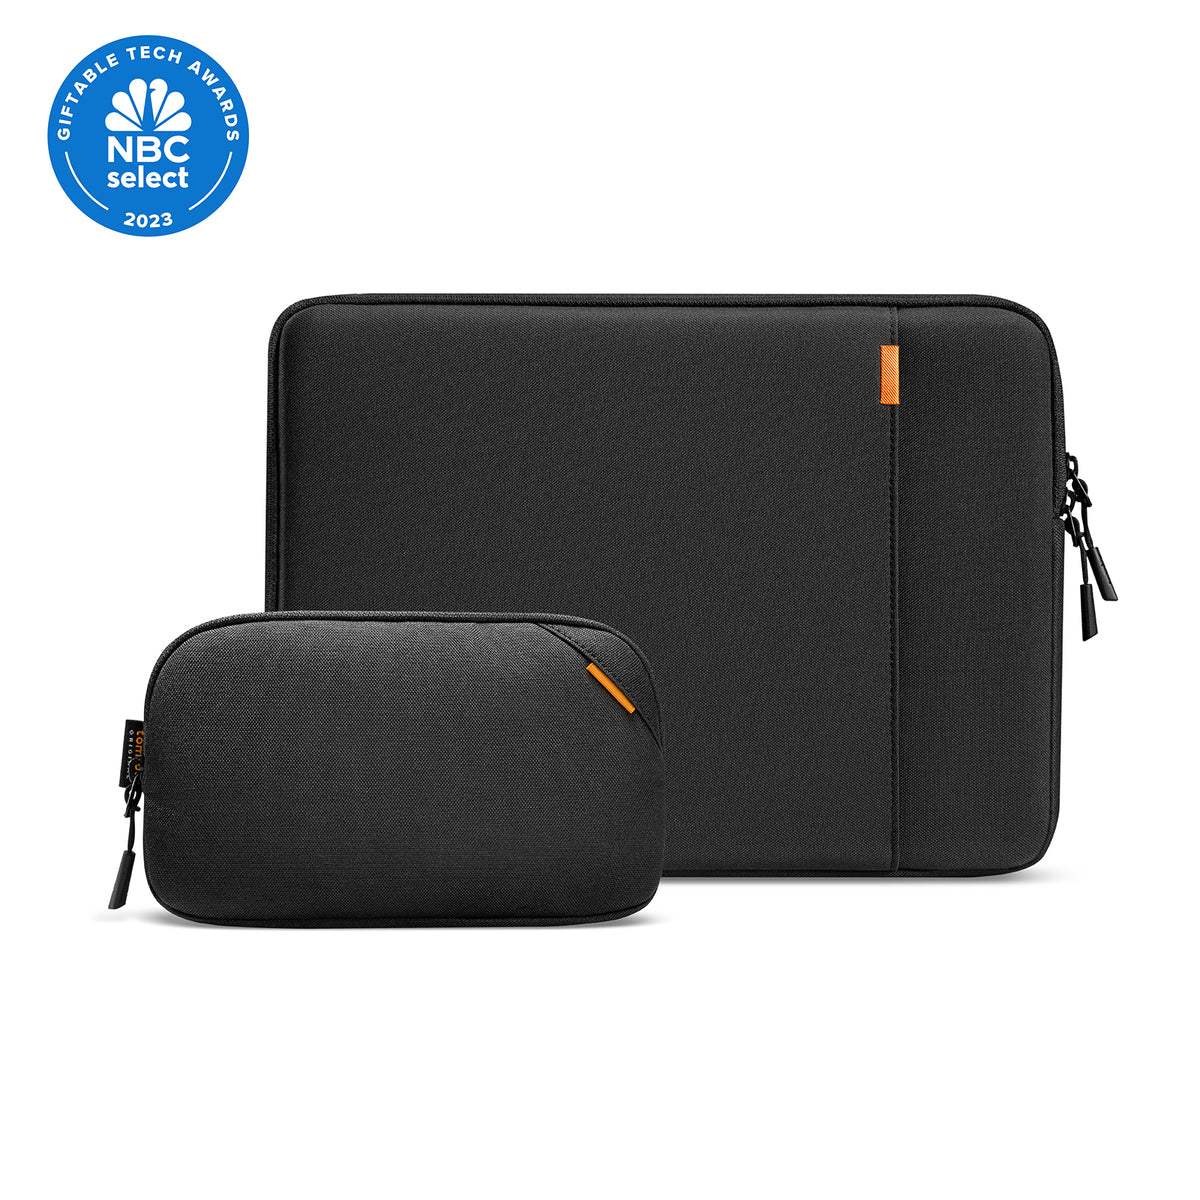 primary_Defender-A13 Laptop Sleeve Kit for 13-inch MacBook